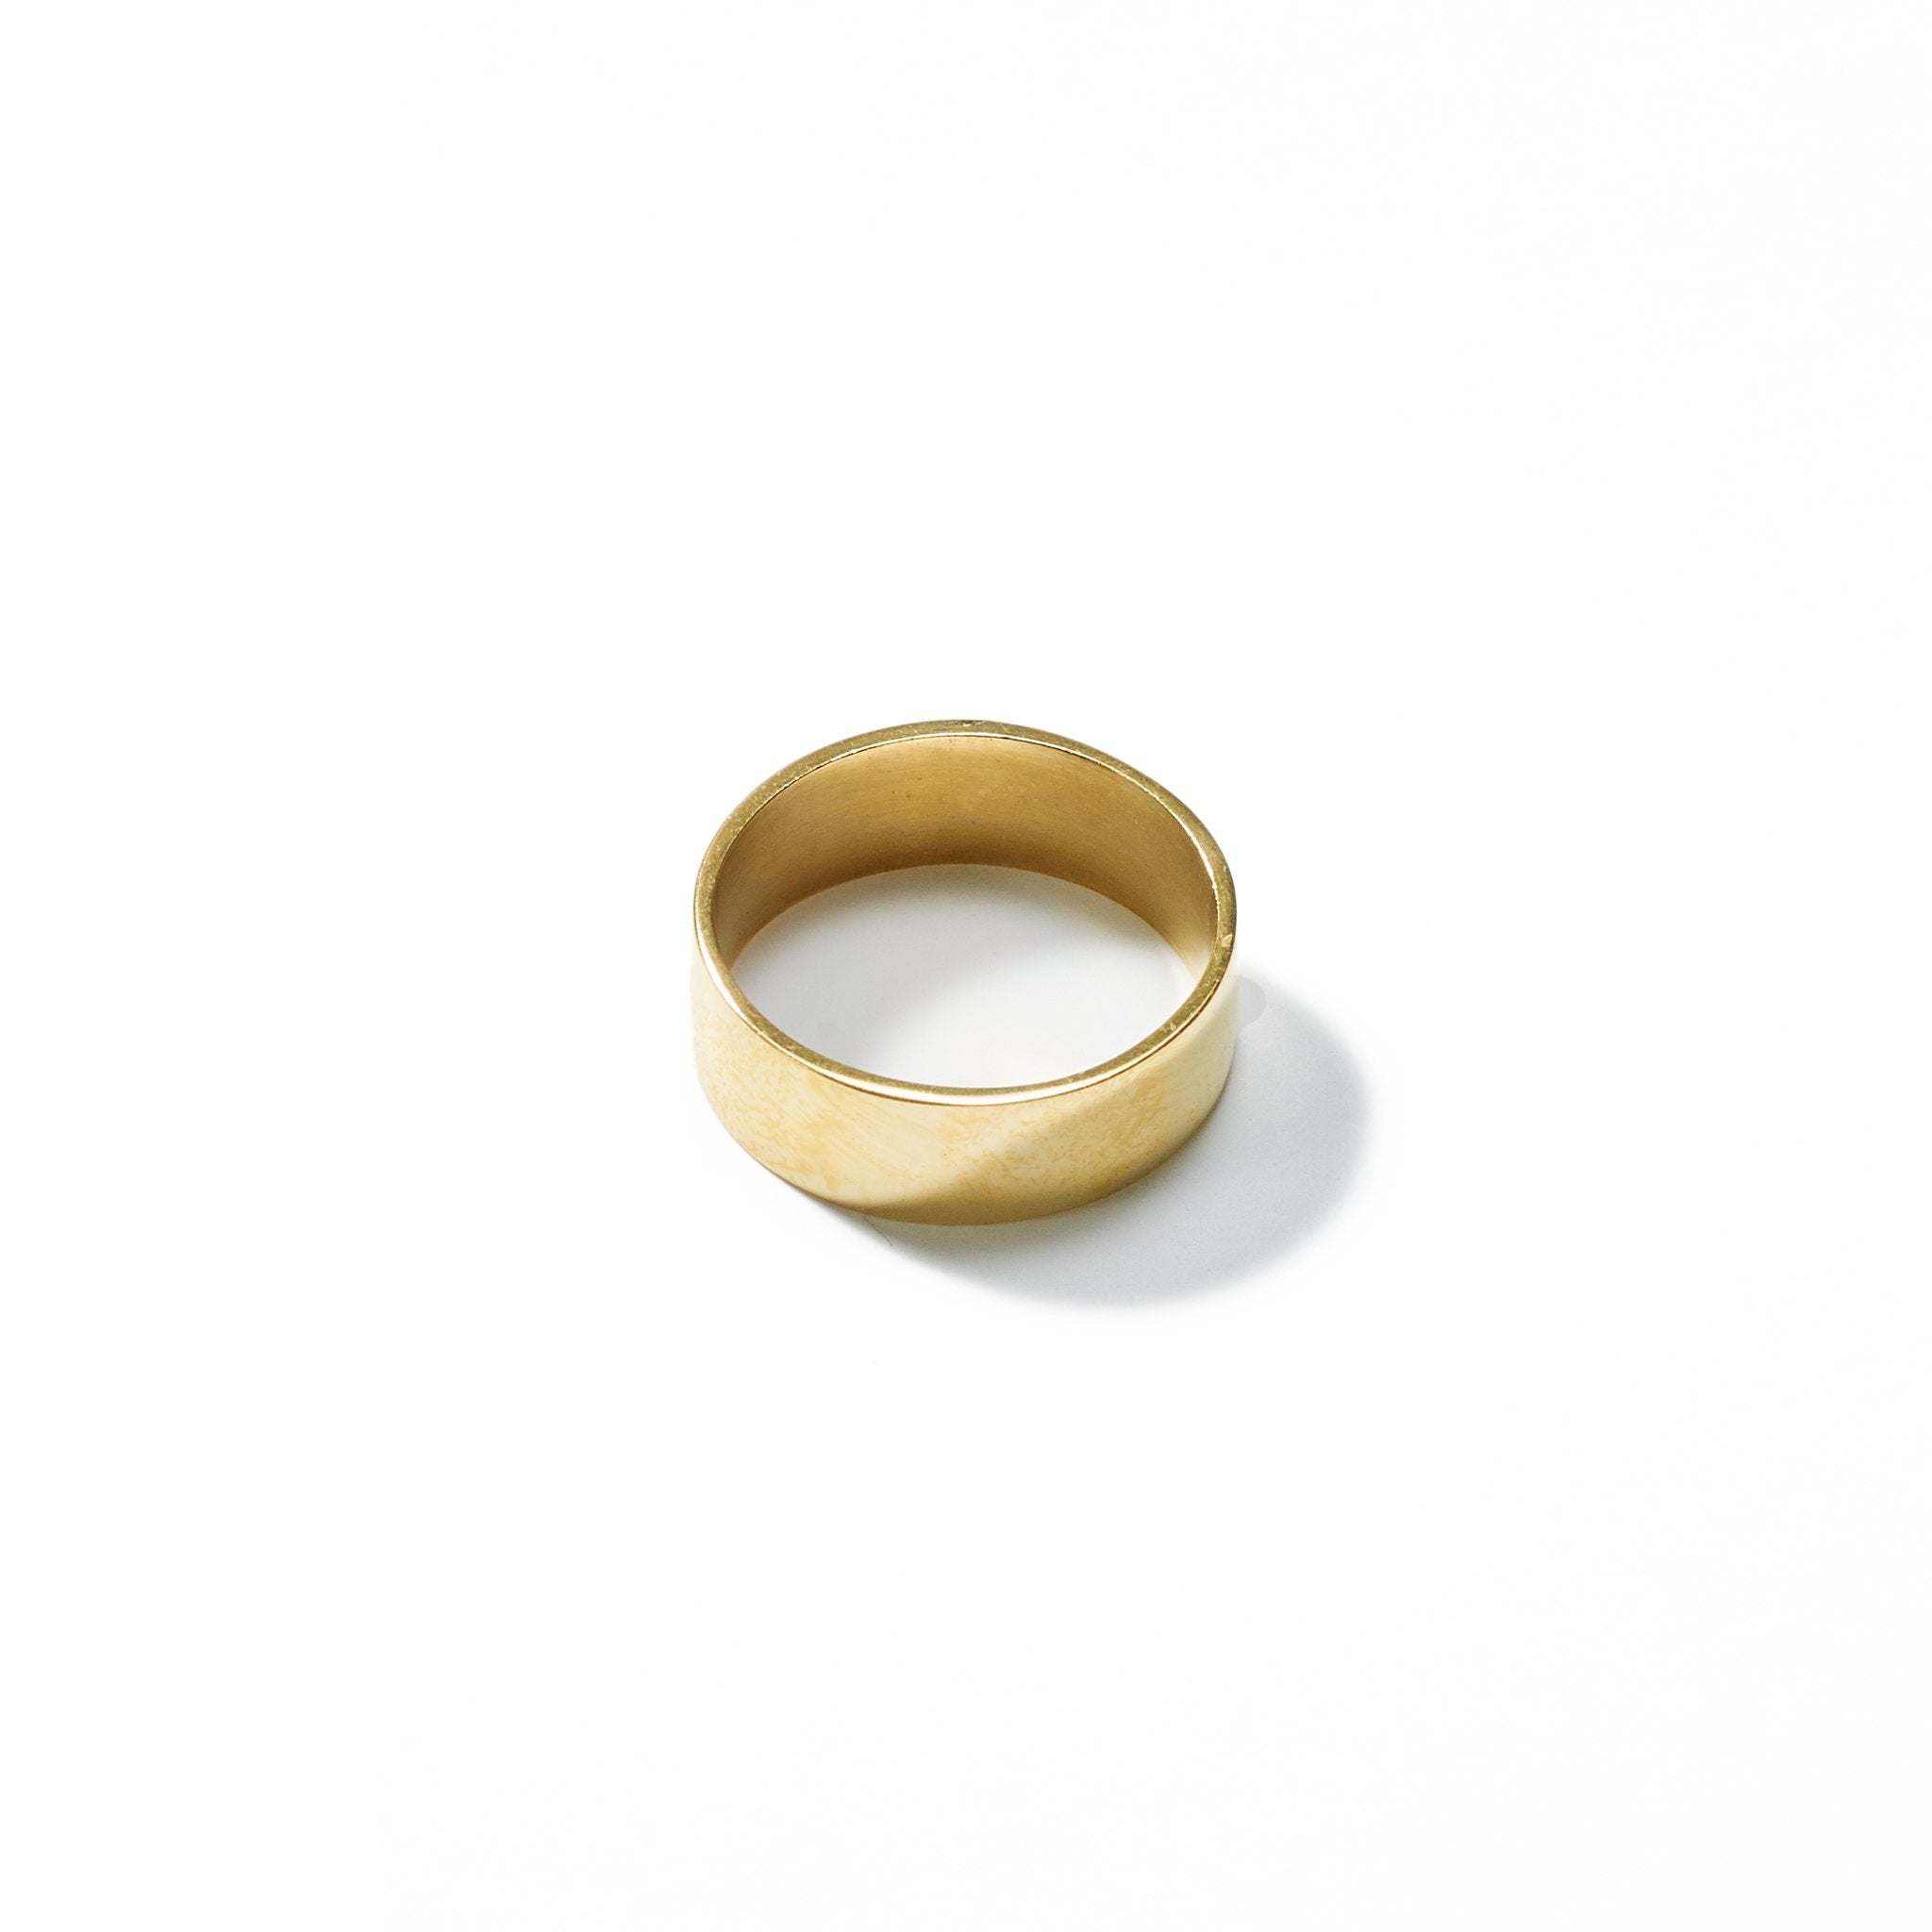 A classic and understated size 7 ring, of medium width, handcrafted from upcycled brass.Perfect for stacking or beautiful alone.